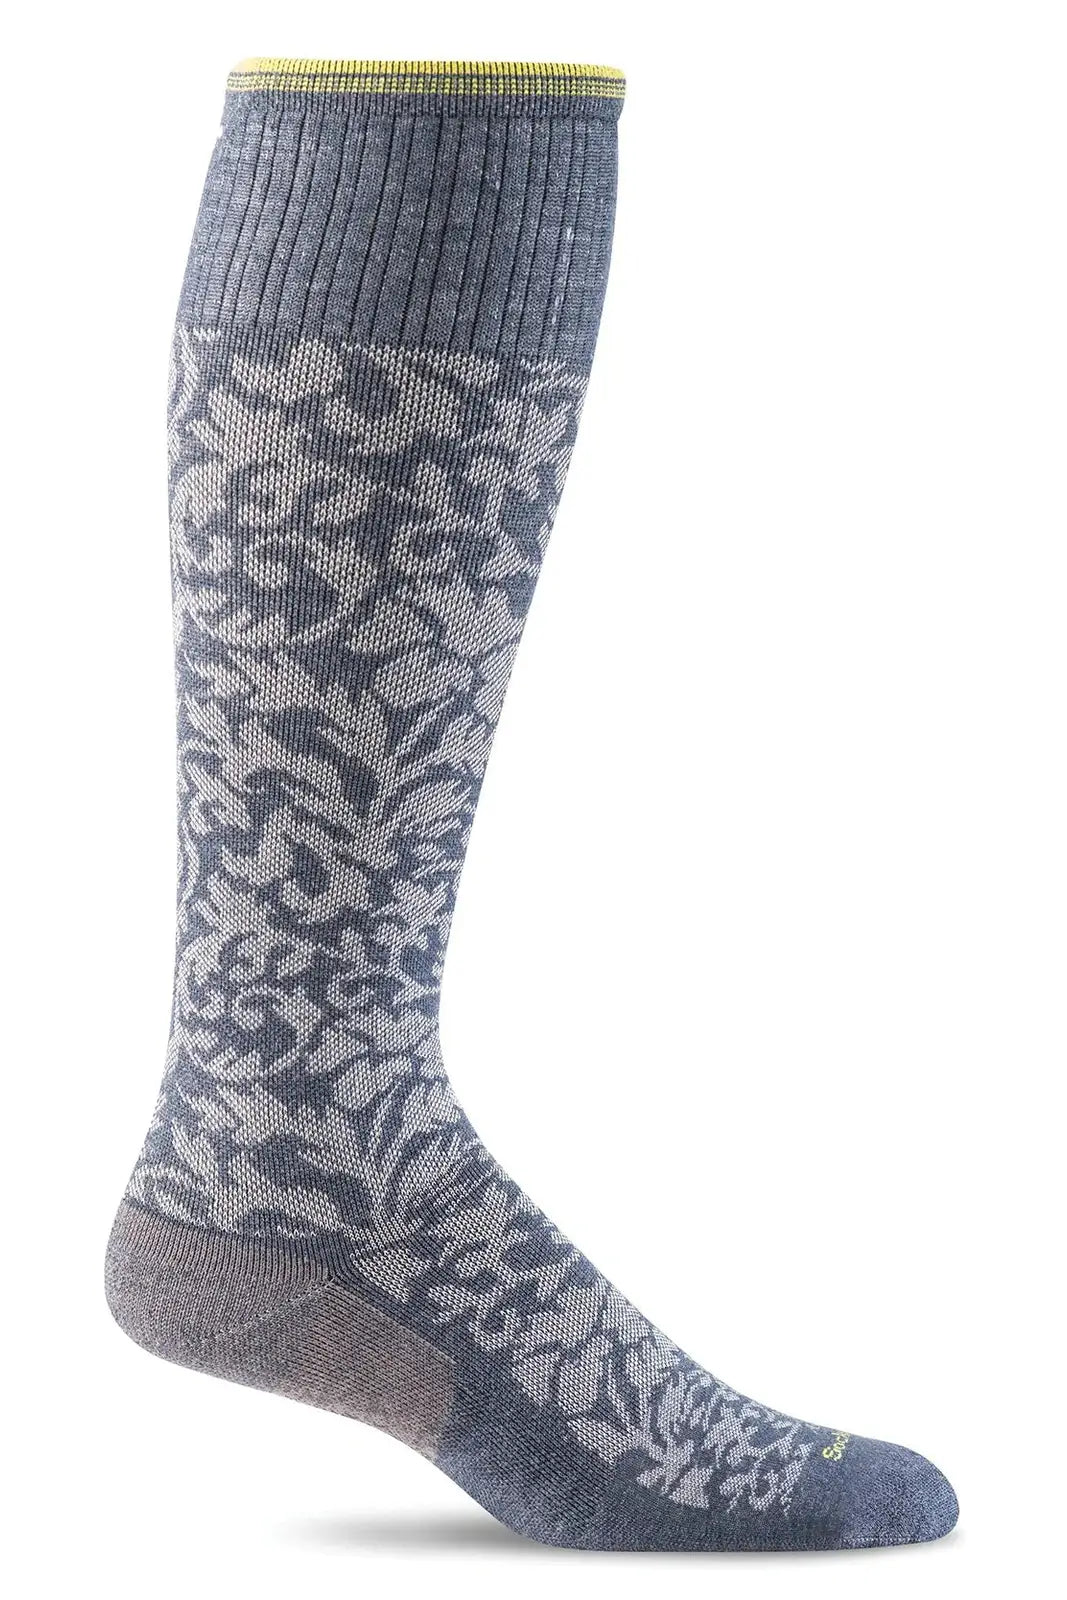 SOCKWELL Damask Moderate Graduated Compression